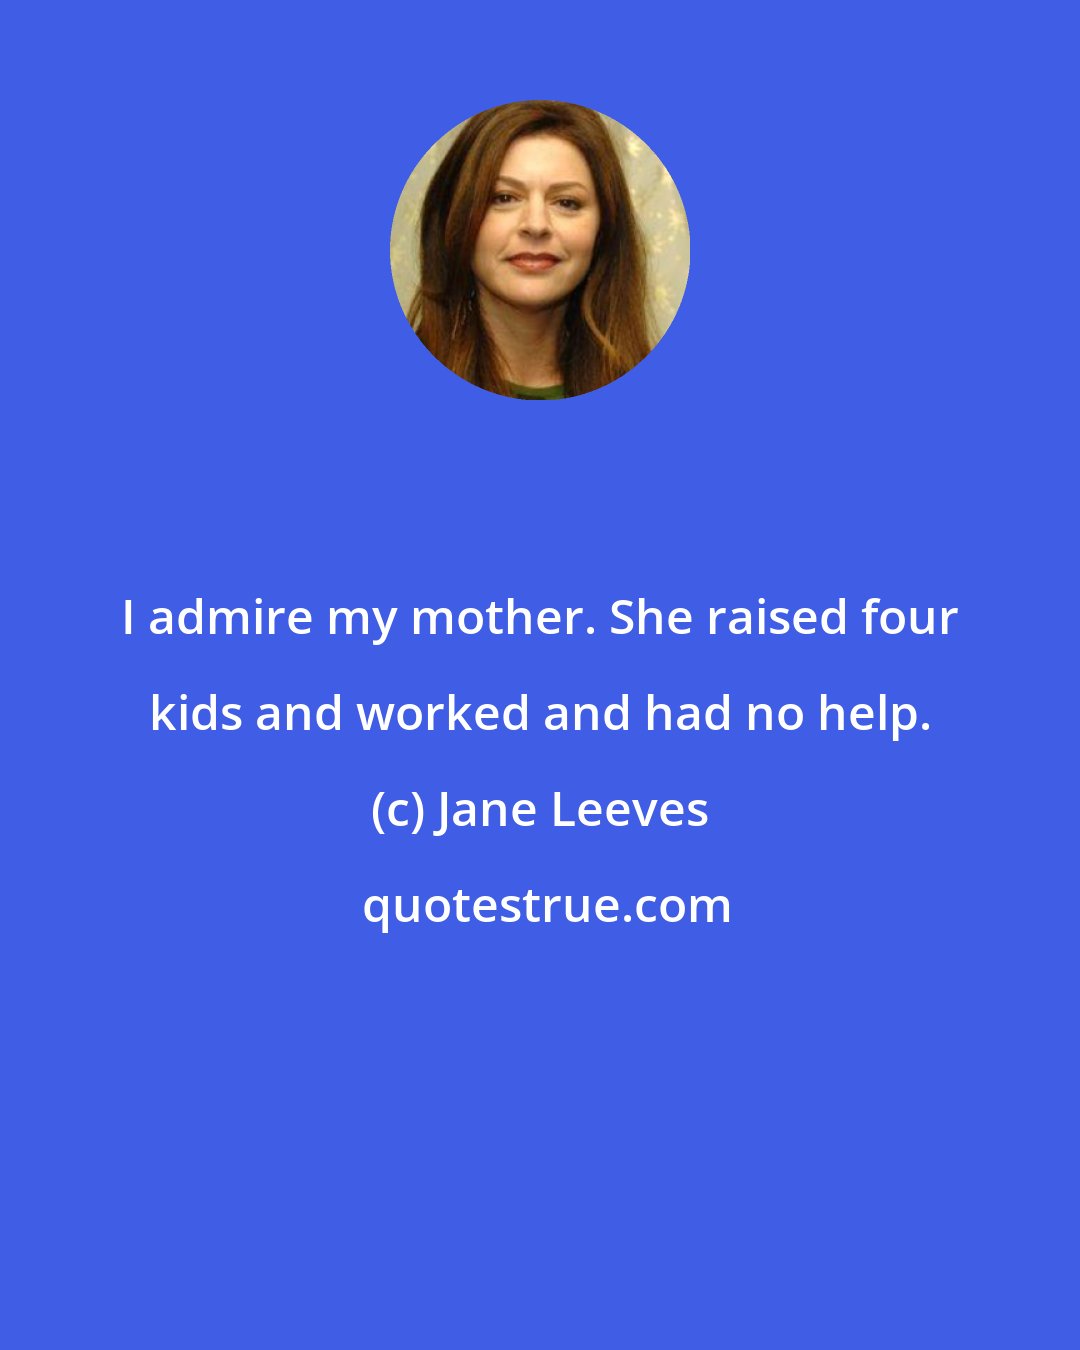 Jane Leeves: I admire my mother. She raised four kids and worked and had no help.